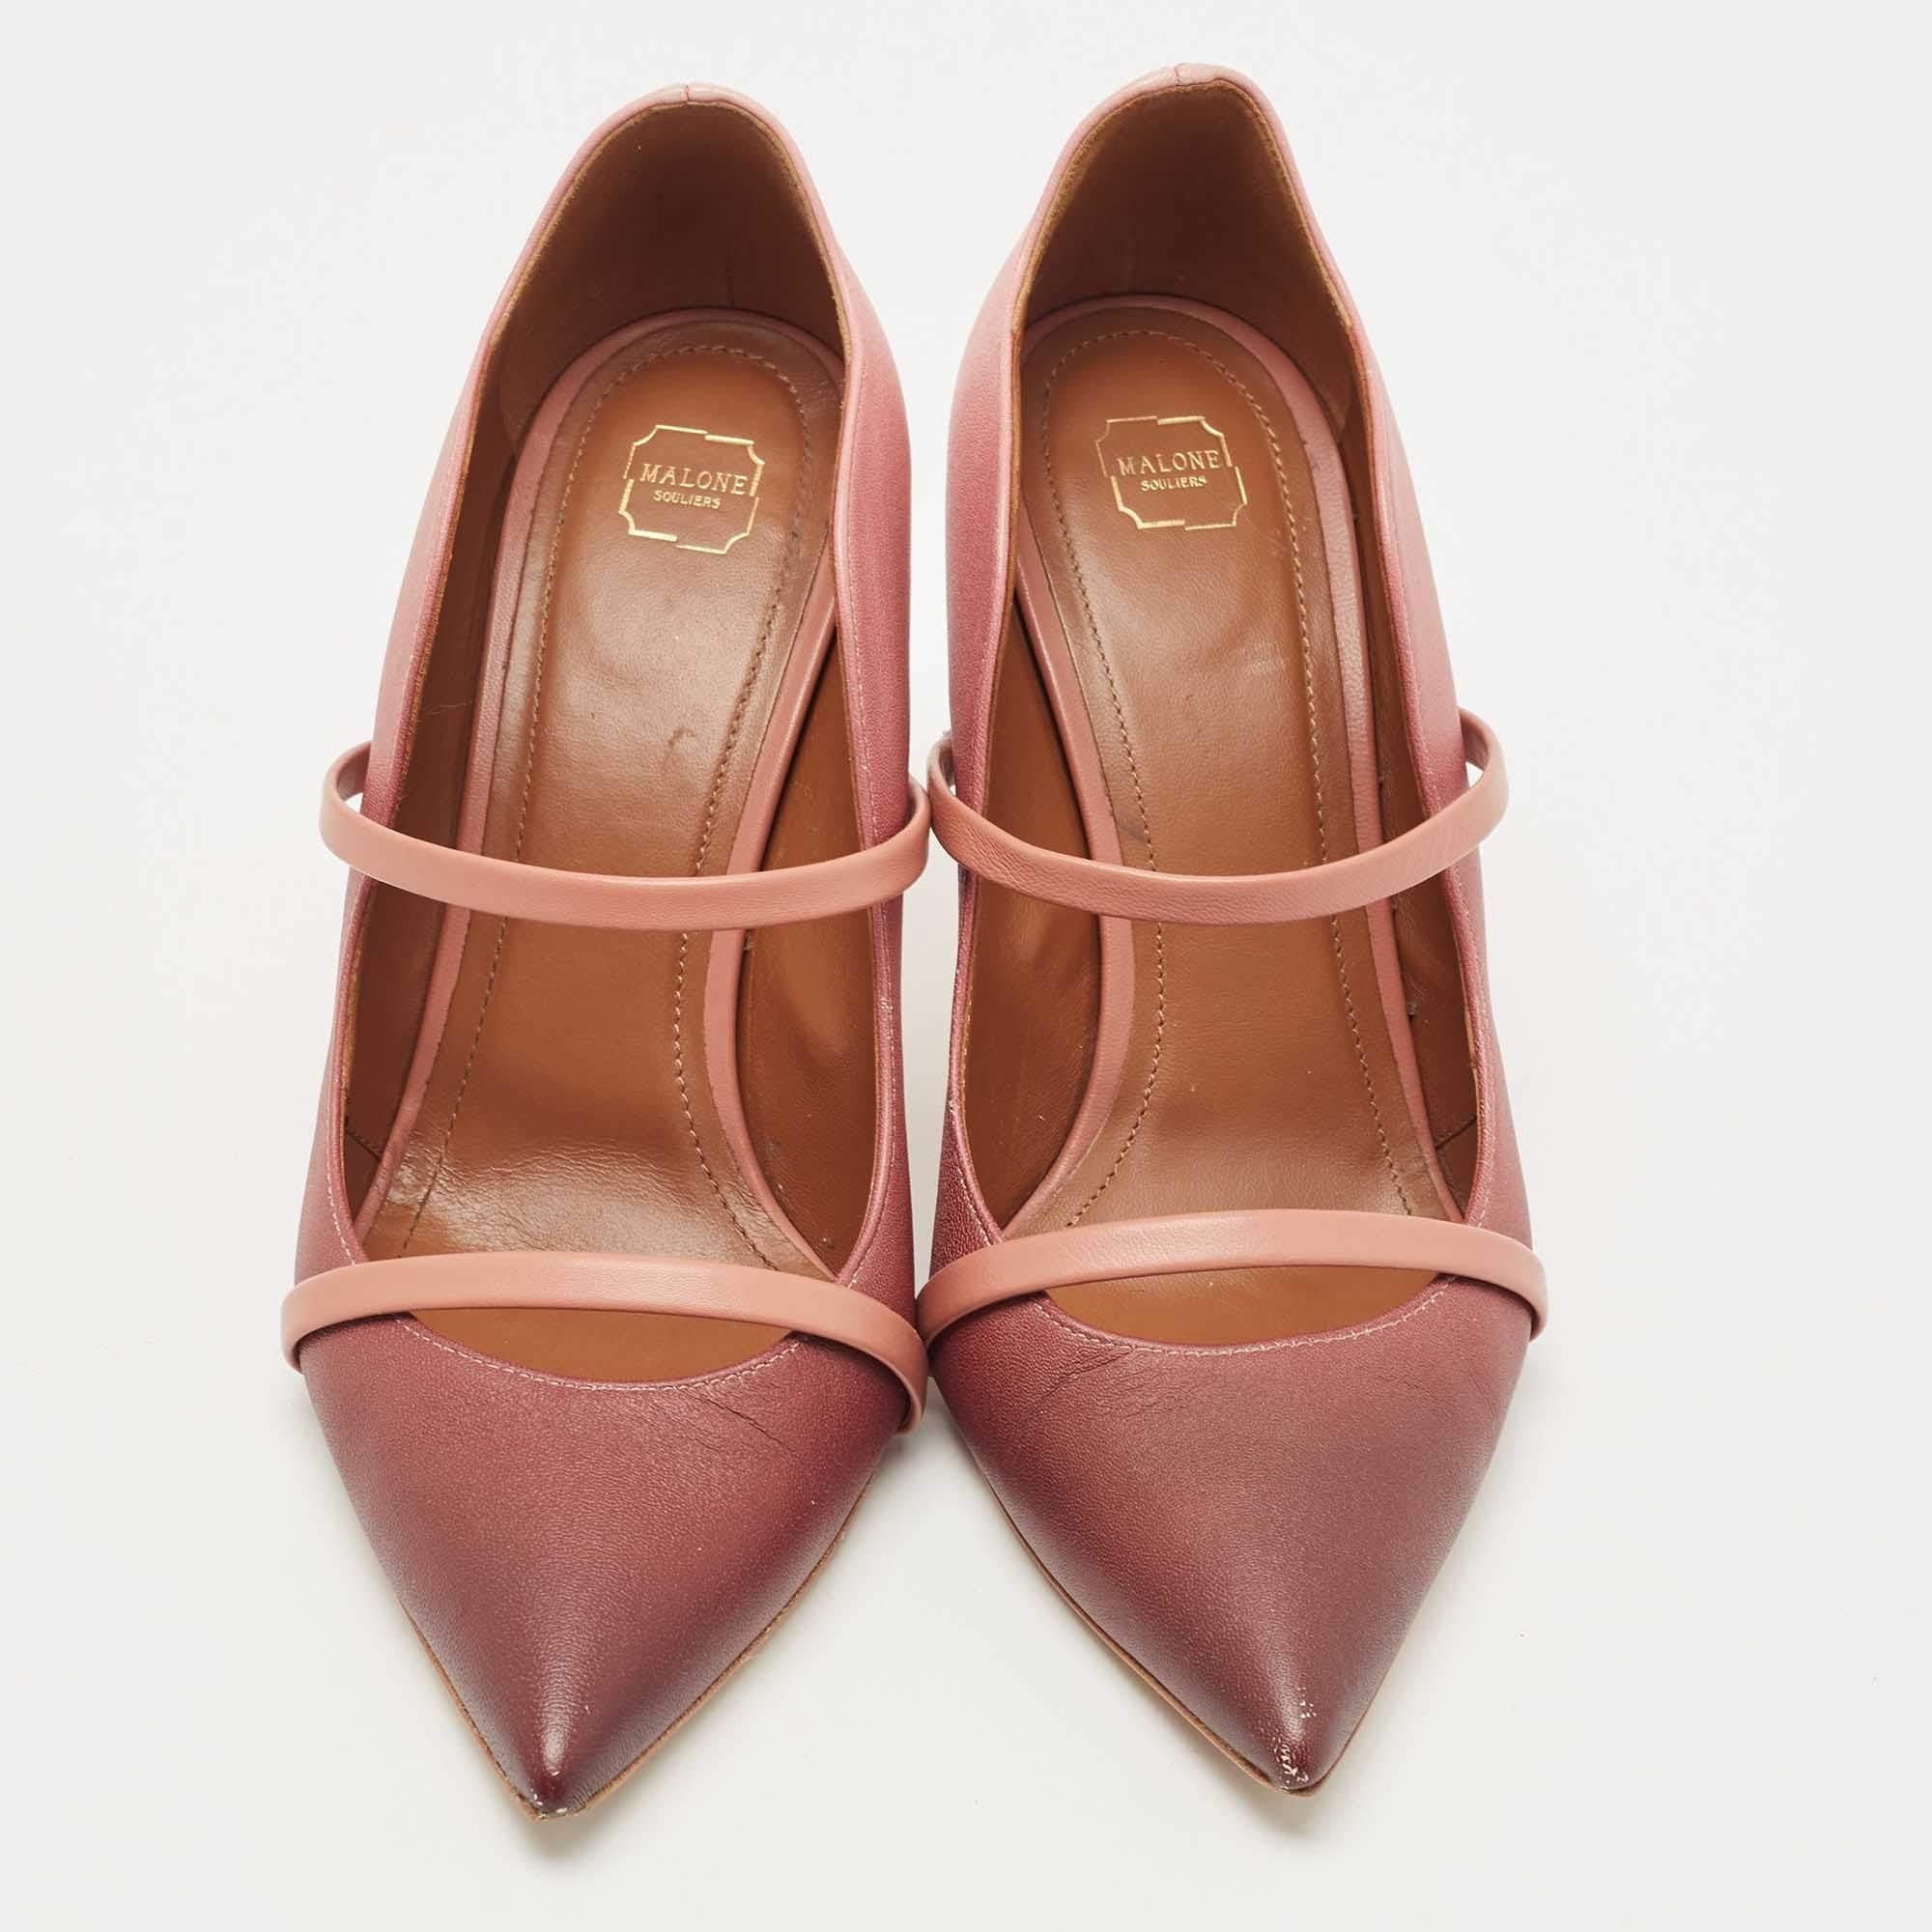 These iconic Maureen pumps are not only graceful and chic but also highly comfortable. Crafted from leather, the straps on the uppers will highlight the shape of your feet. Slim heels complete these shoes.

Includes: Original Box

